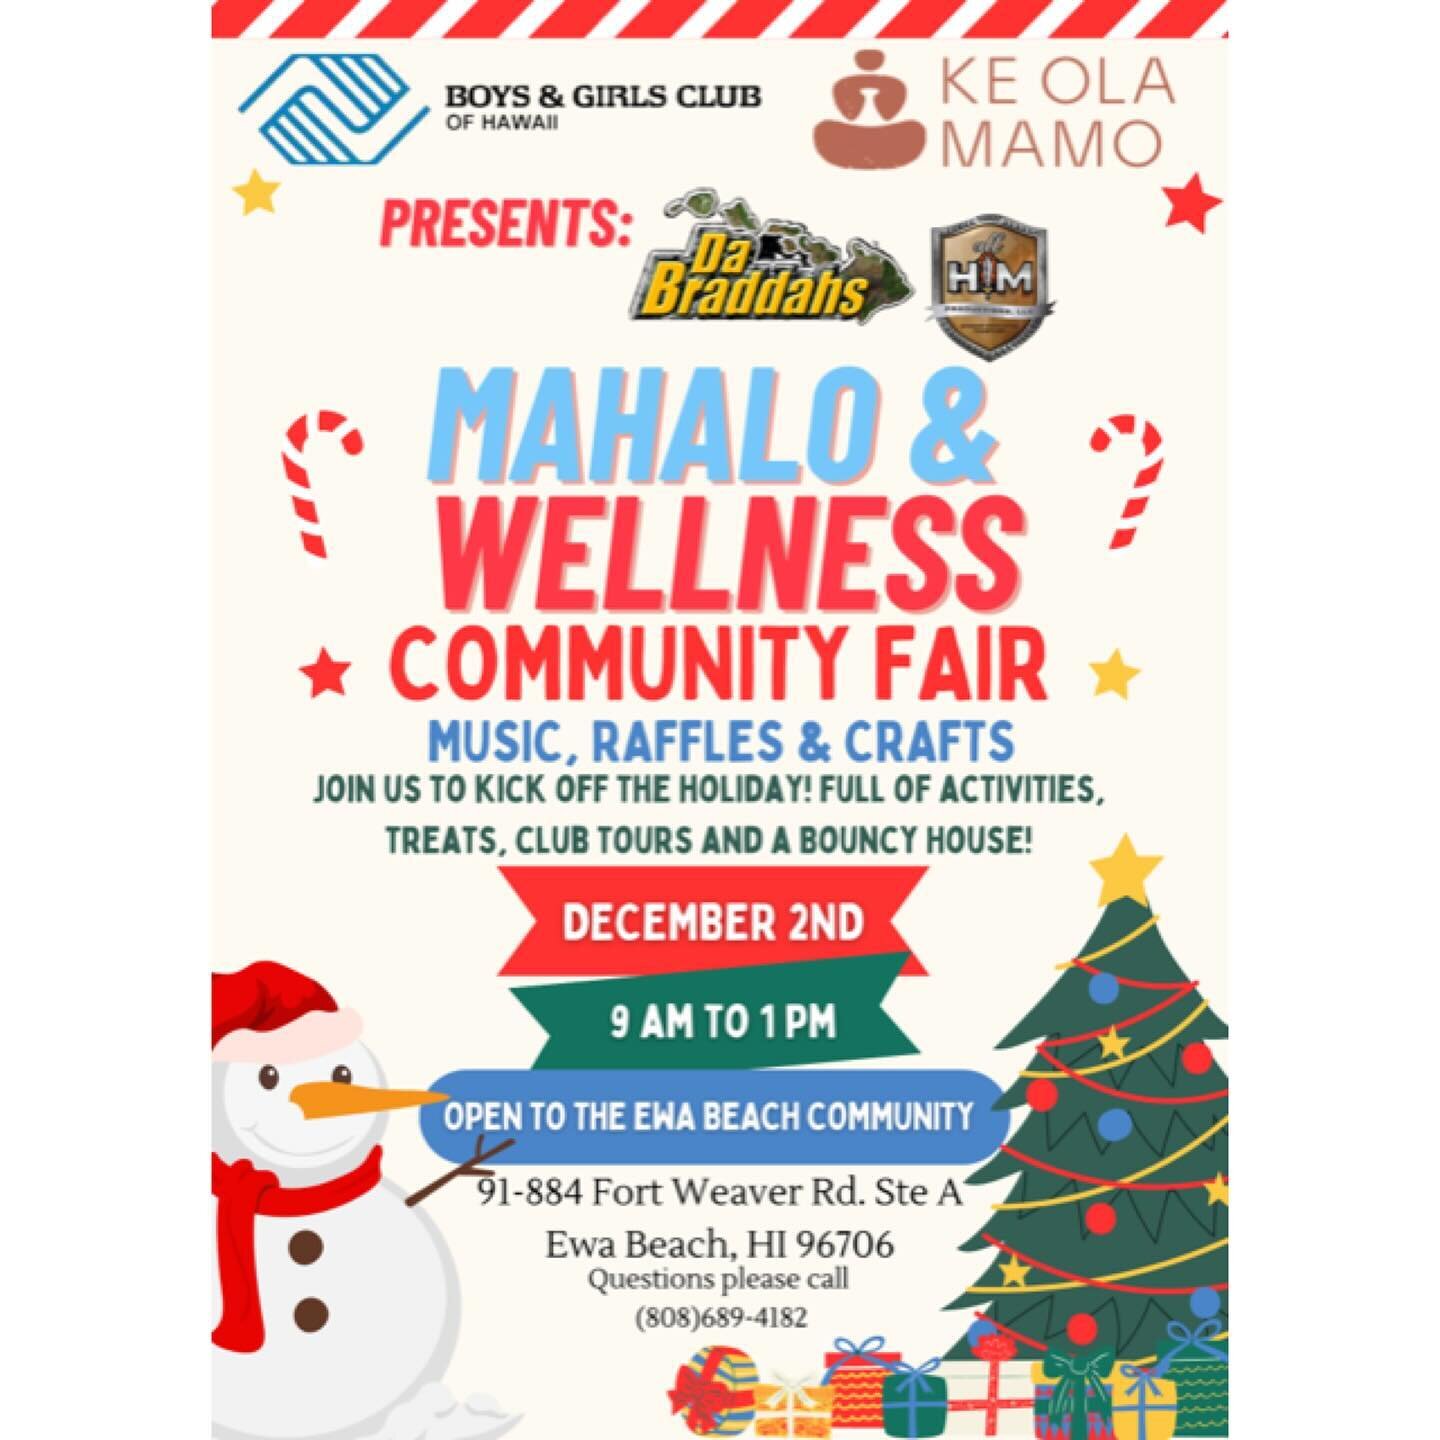 Join us and the @bgch808 this Saturday in Ewa Beach for the Mahalo &amp; Wellness Community Fair!! 

Kick off your Christmas Holiday with activities, treats, club tours and a bouncy house🎉
Bring your ohana and lets come spend time with us. We hope t